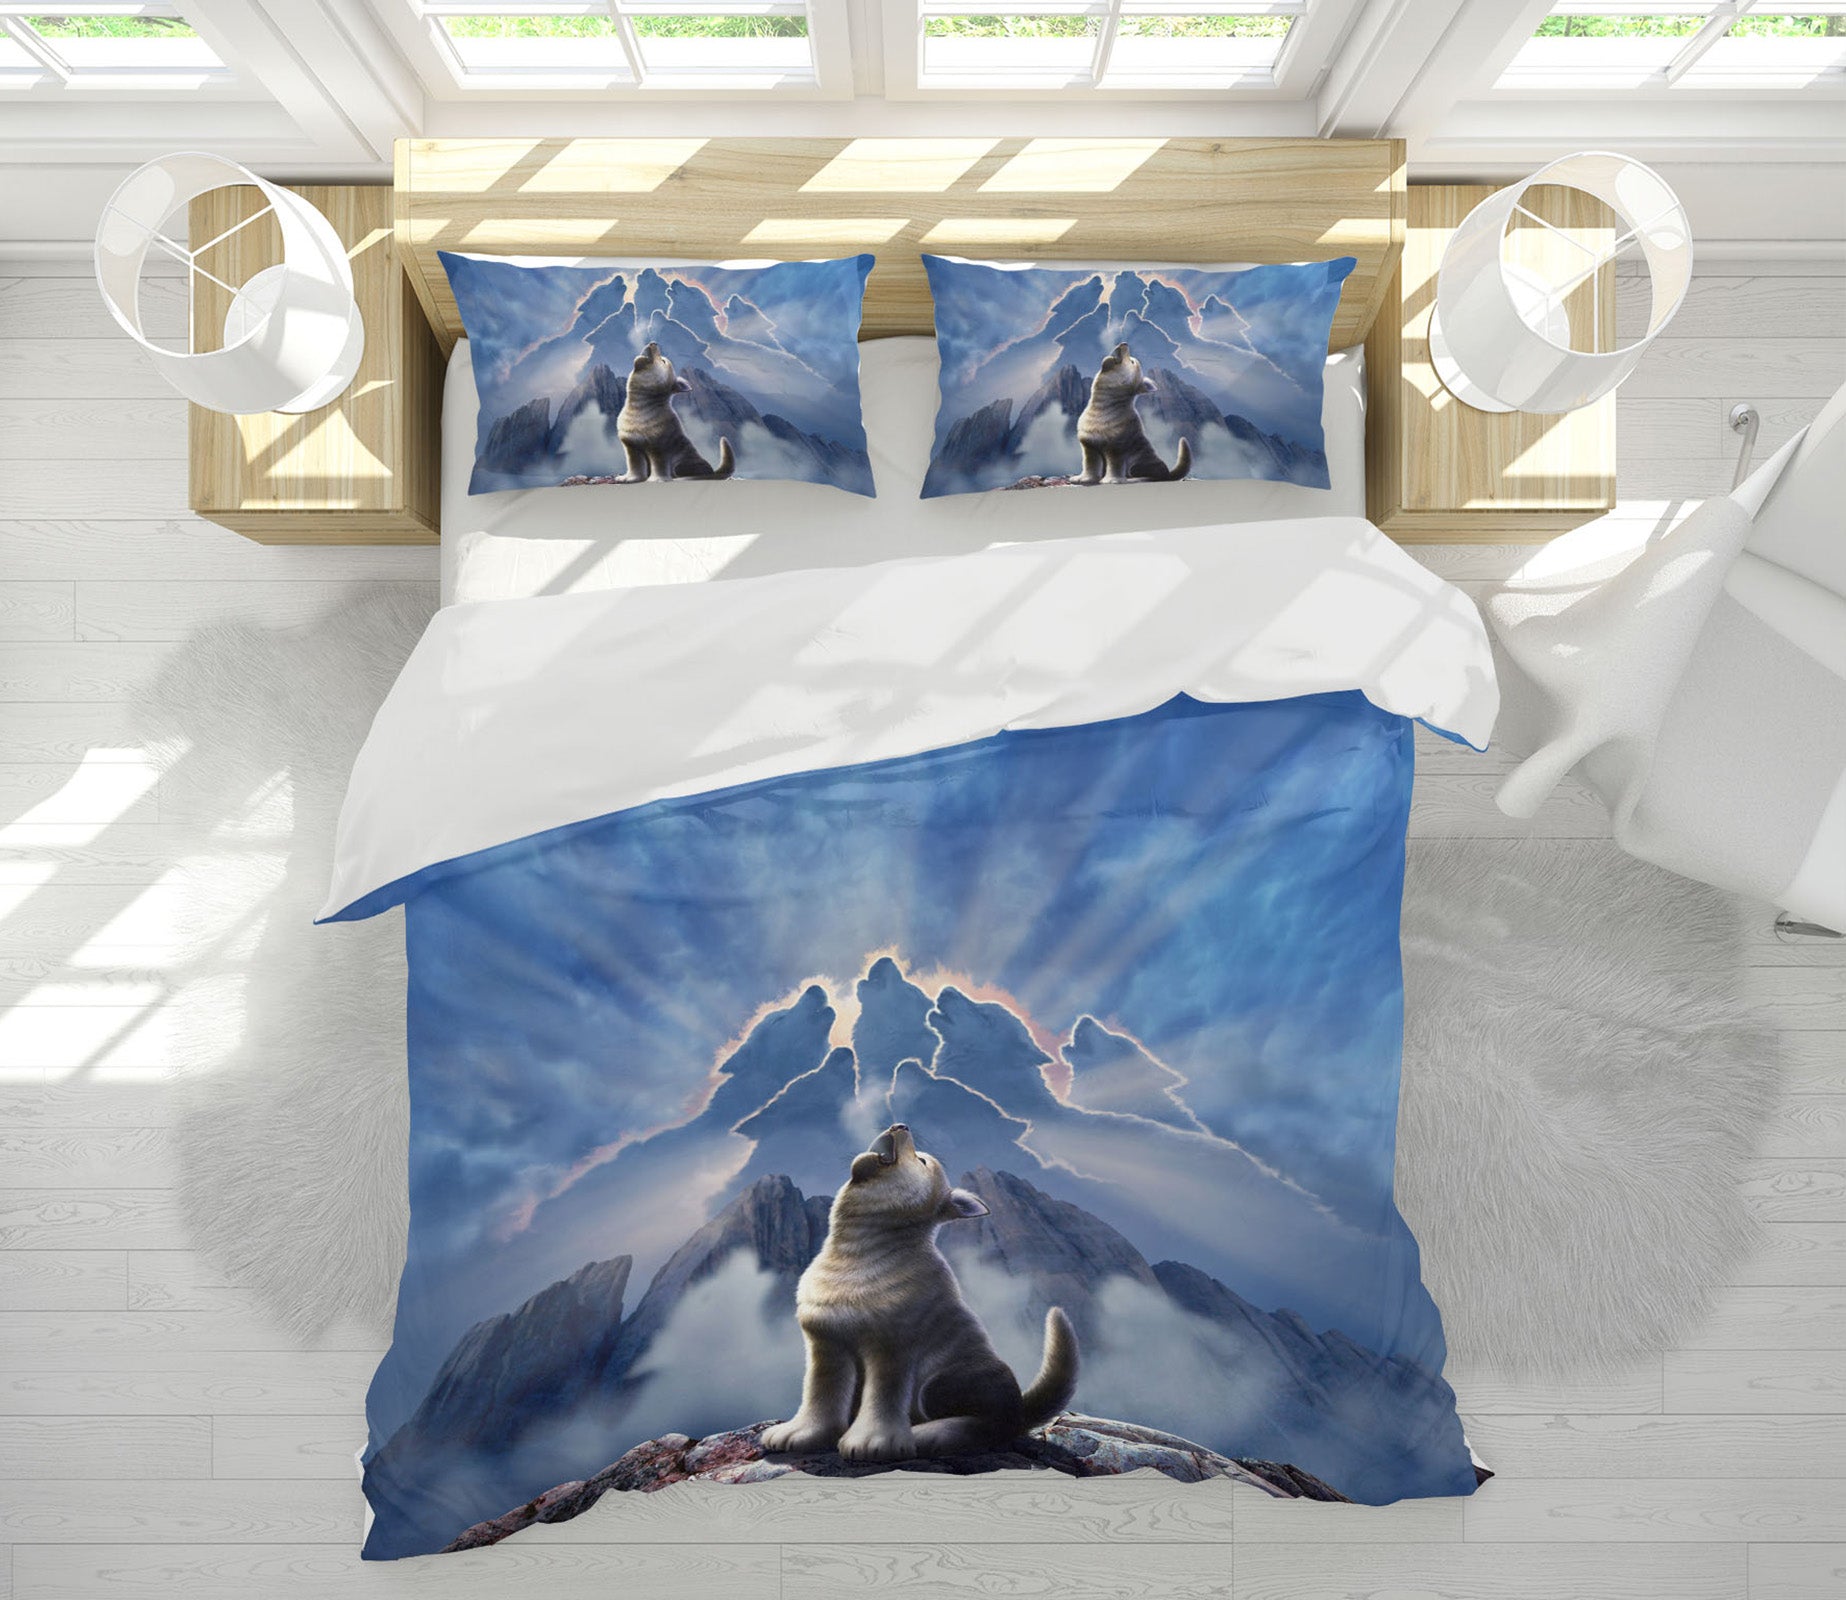 3D Leader Of The Pack 18063 Jerry LoFaro bedding Bed Pillowcases Quilt